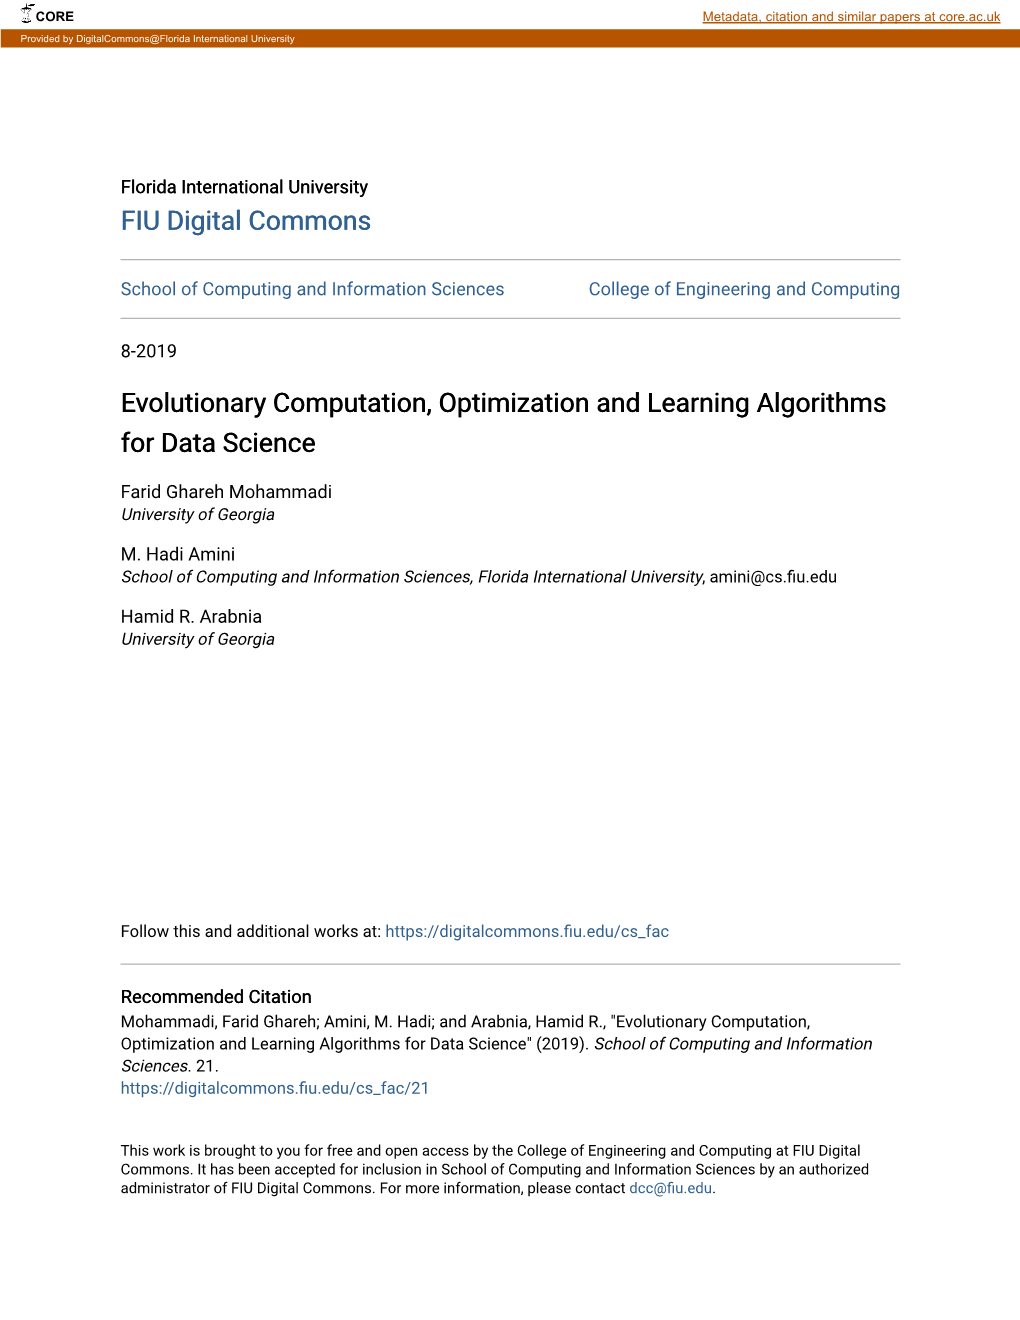 Evolutionary Computation, Optimization and Learning Algorithms for Data Science